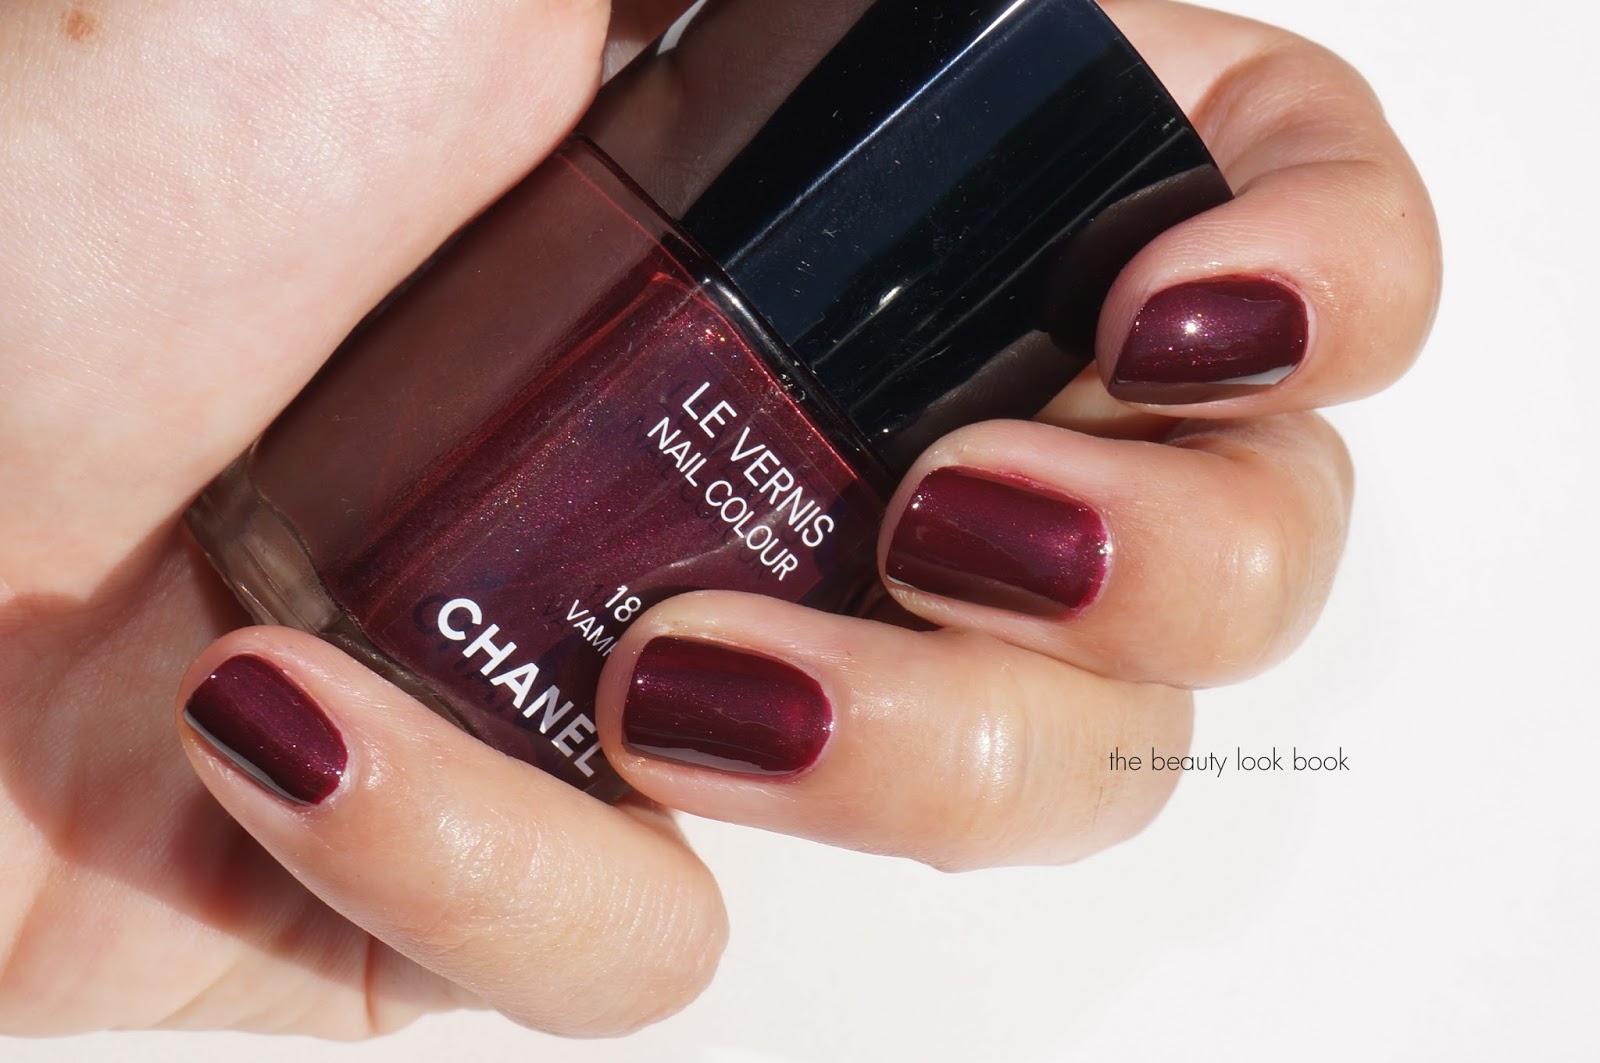 Chanel Le Vernis Longwear Nail Colour in Vamp - wide 1